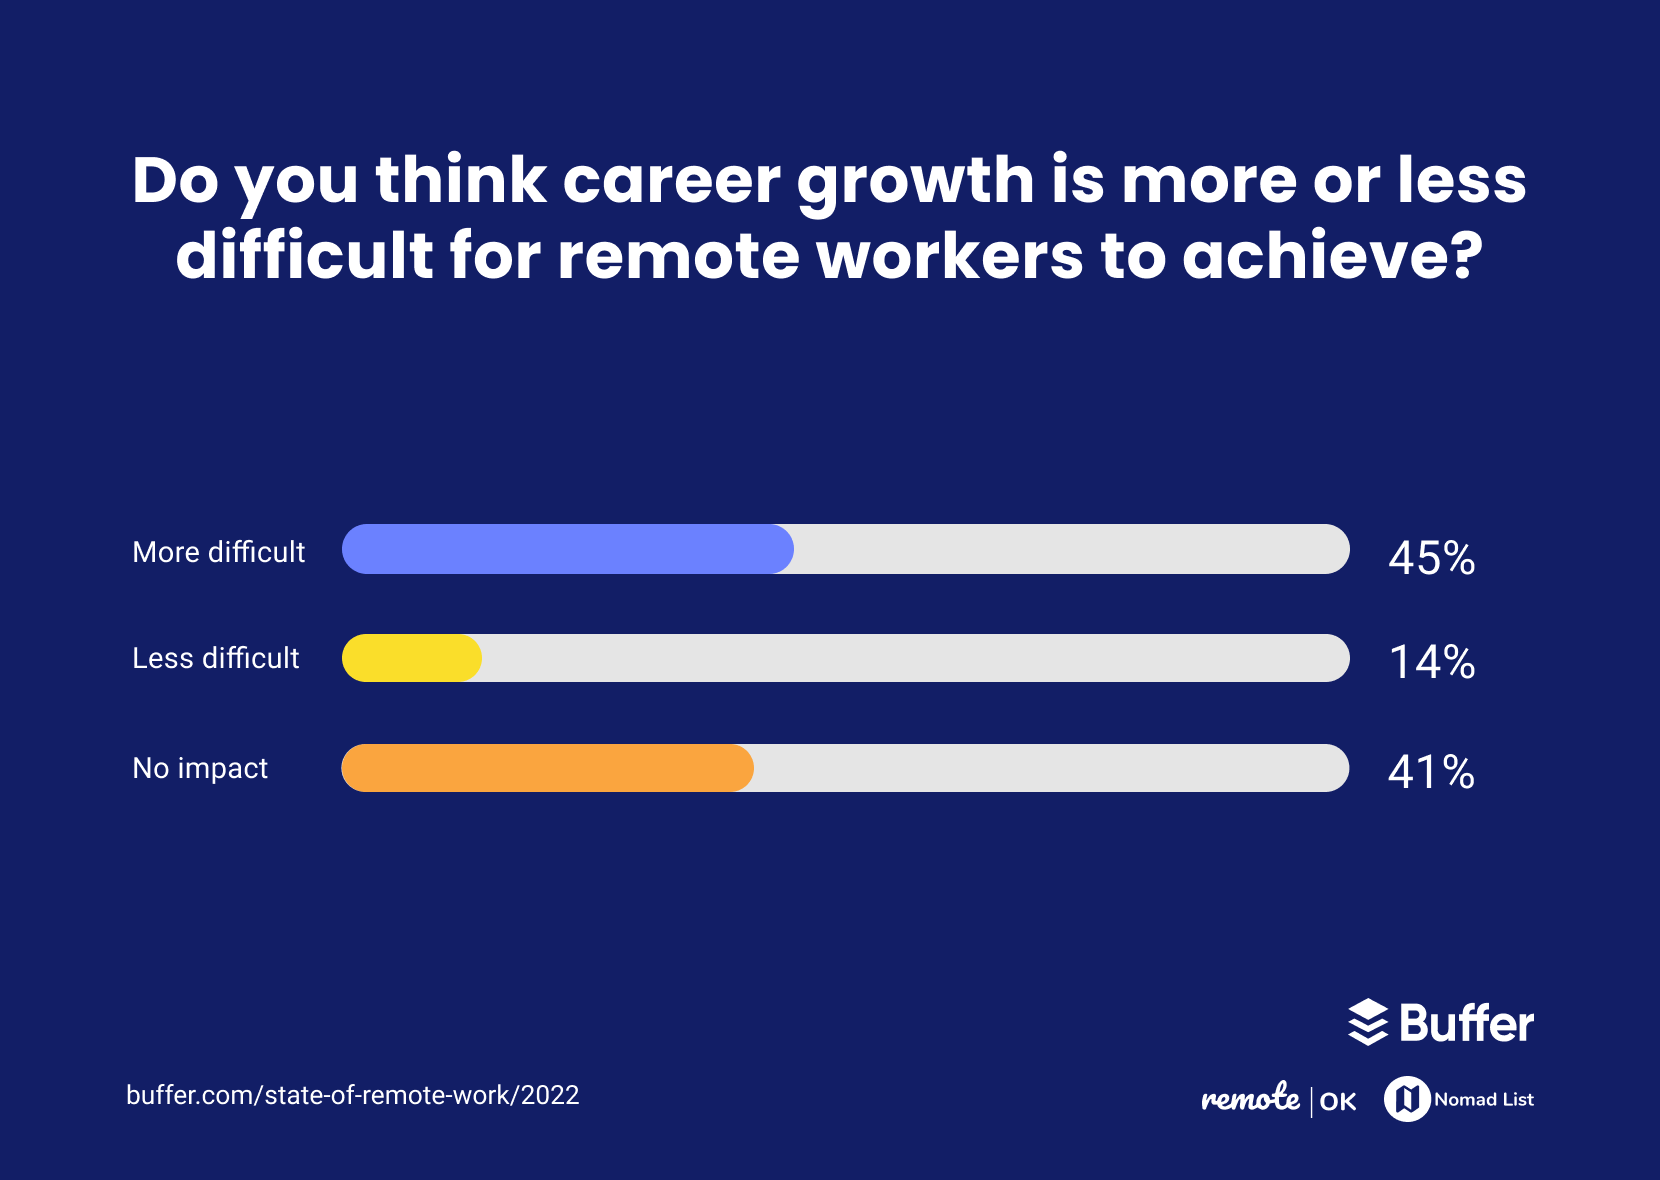 Do you think career growth is more or less difficult for remote workers to achieve?